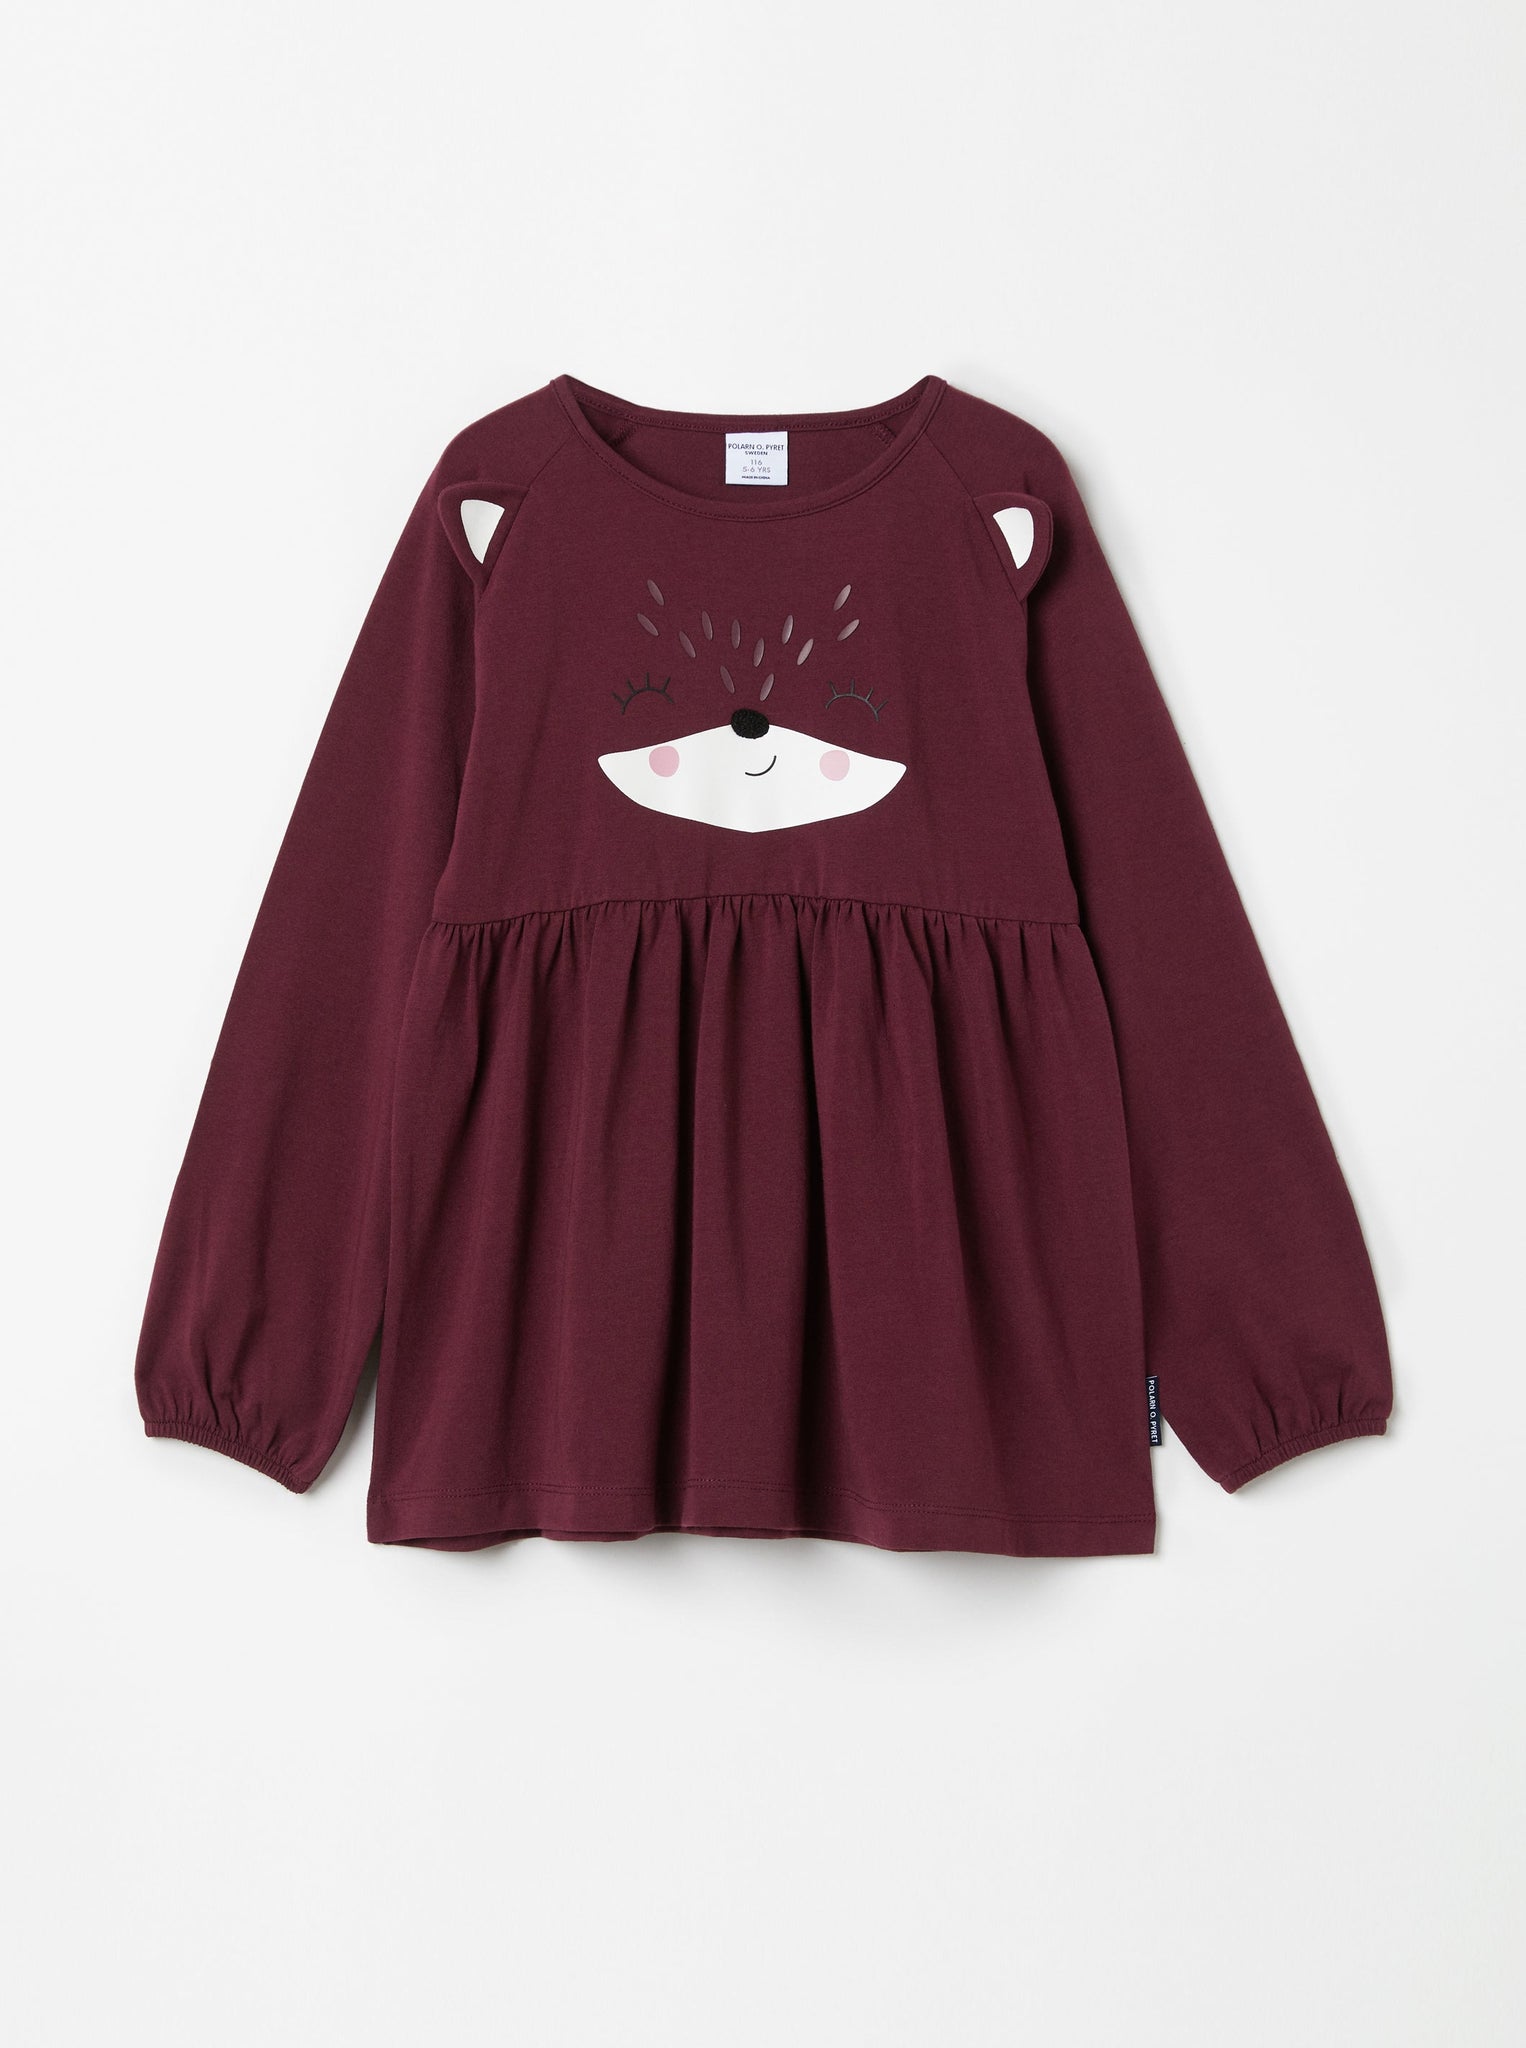 Organic Cotton Fox Print Kids Top from the Polarn O. Pyret kidswear collection. The best ethical kids clothes